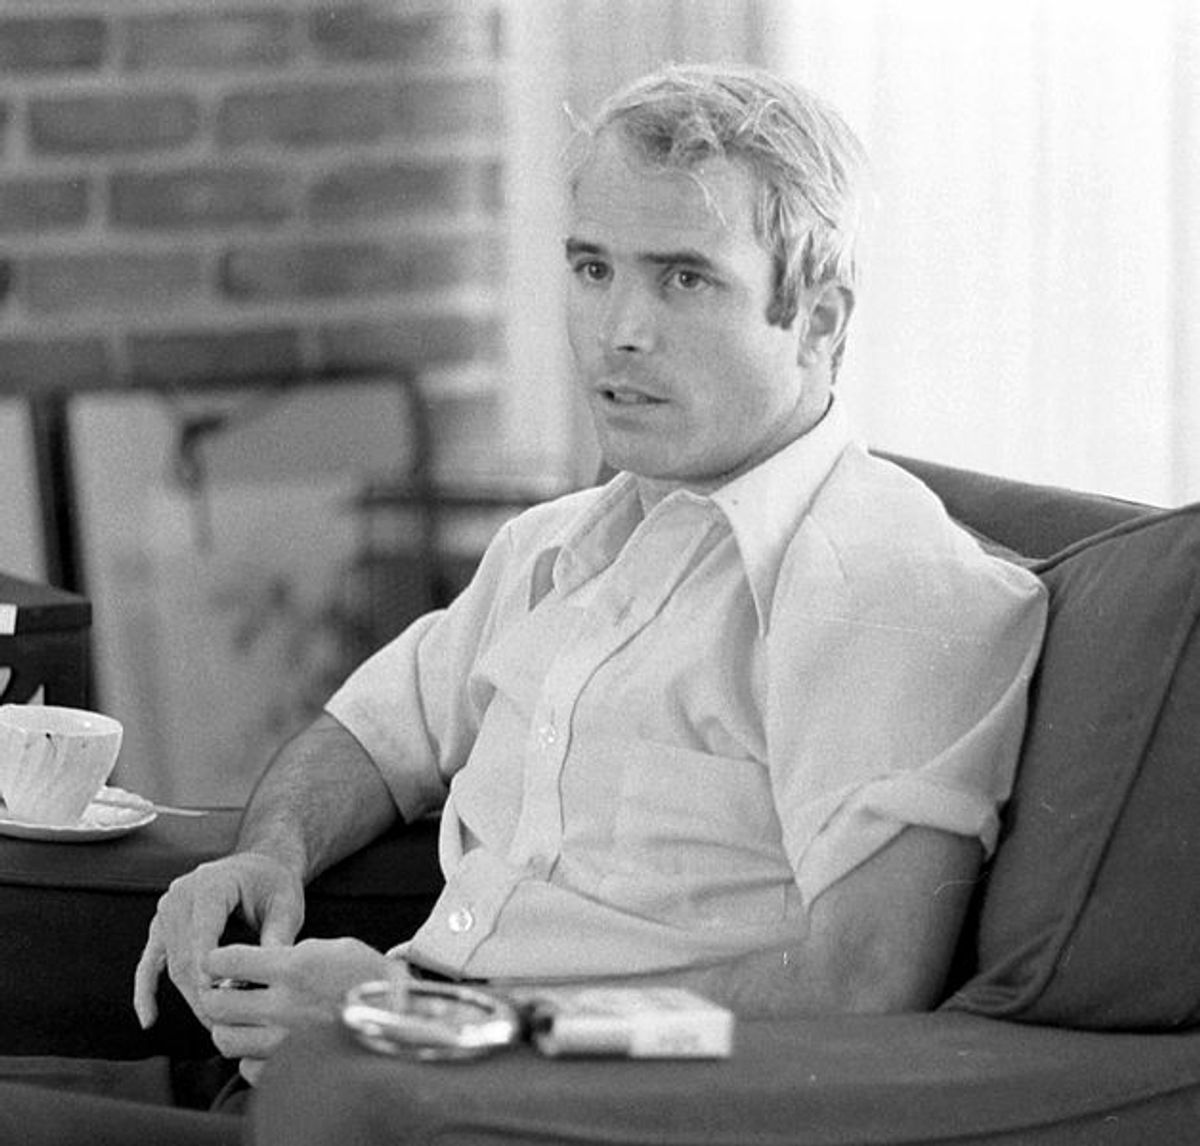 A young McCain being interviewed for U.S. News, April 24, 1973.